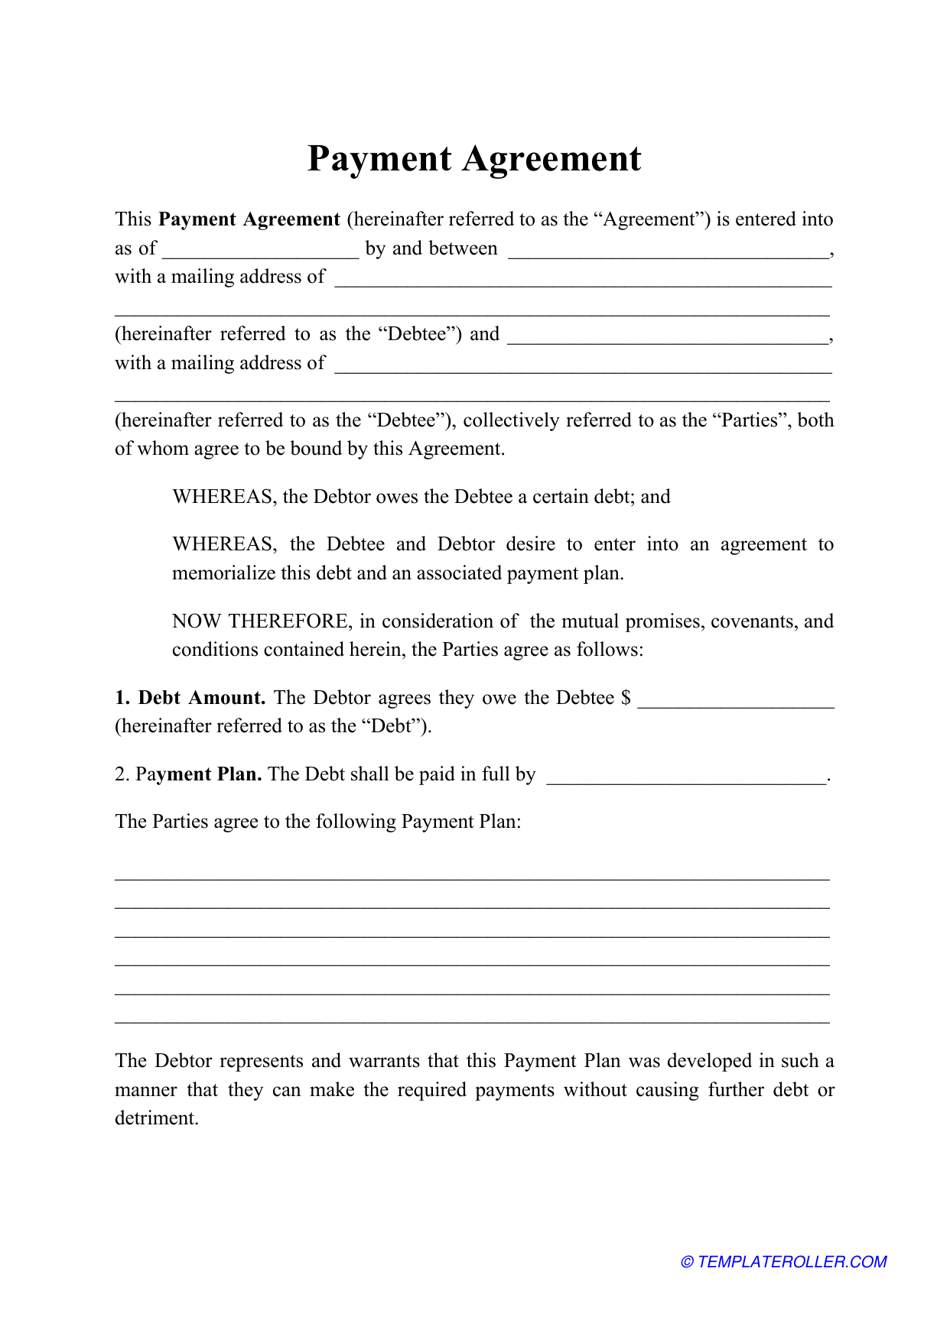 Payment Agreement Template Download Printable PDF  Templateroller Within payment terms agreement template